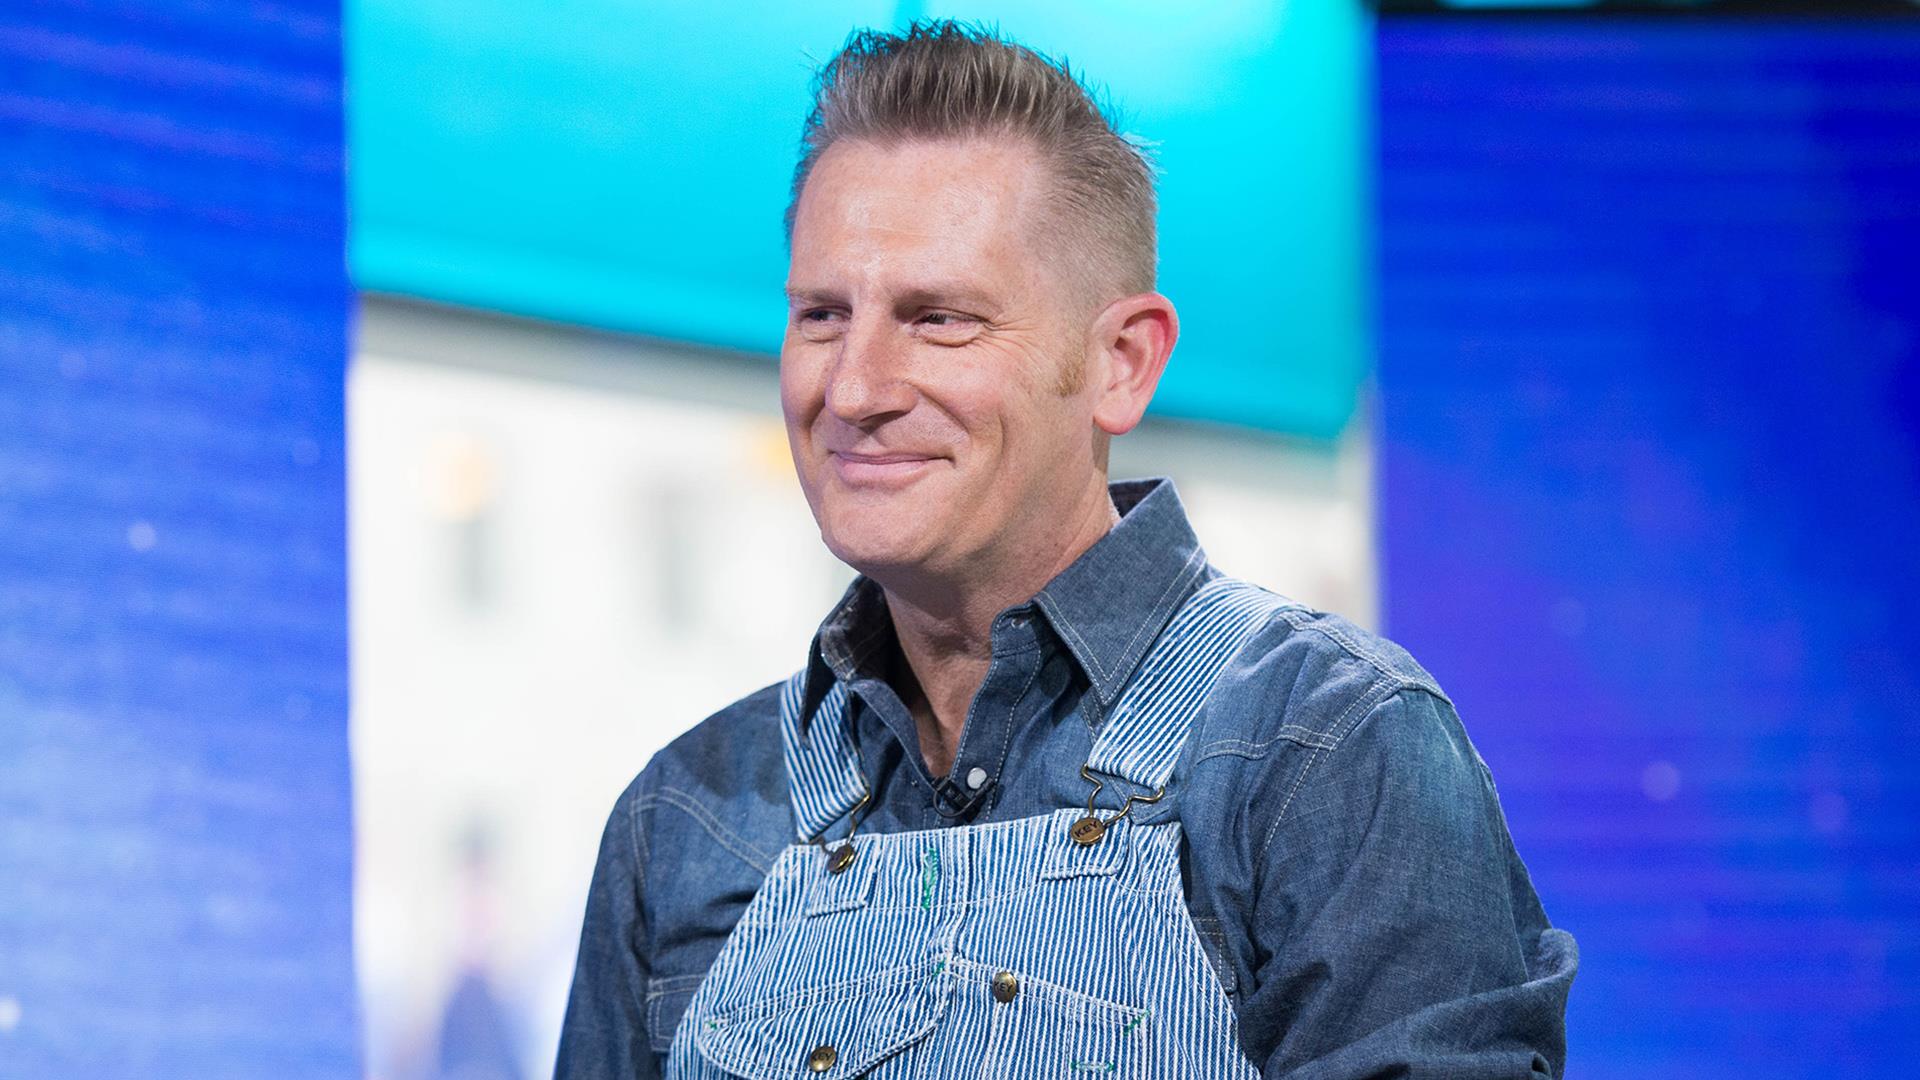 Rory Feek on life without Joey, Grammy win and his new book